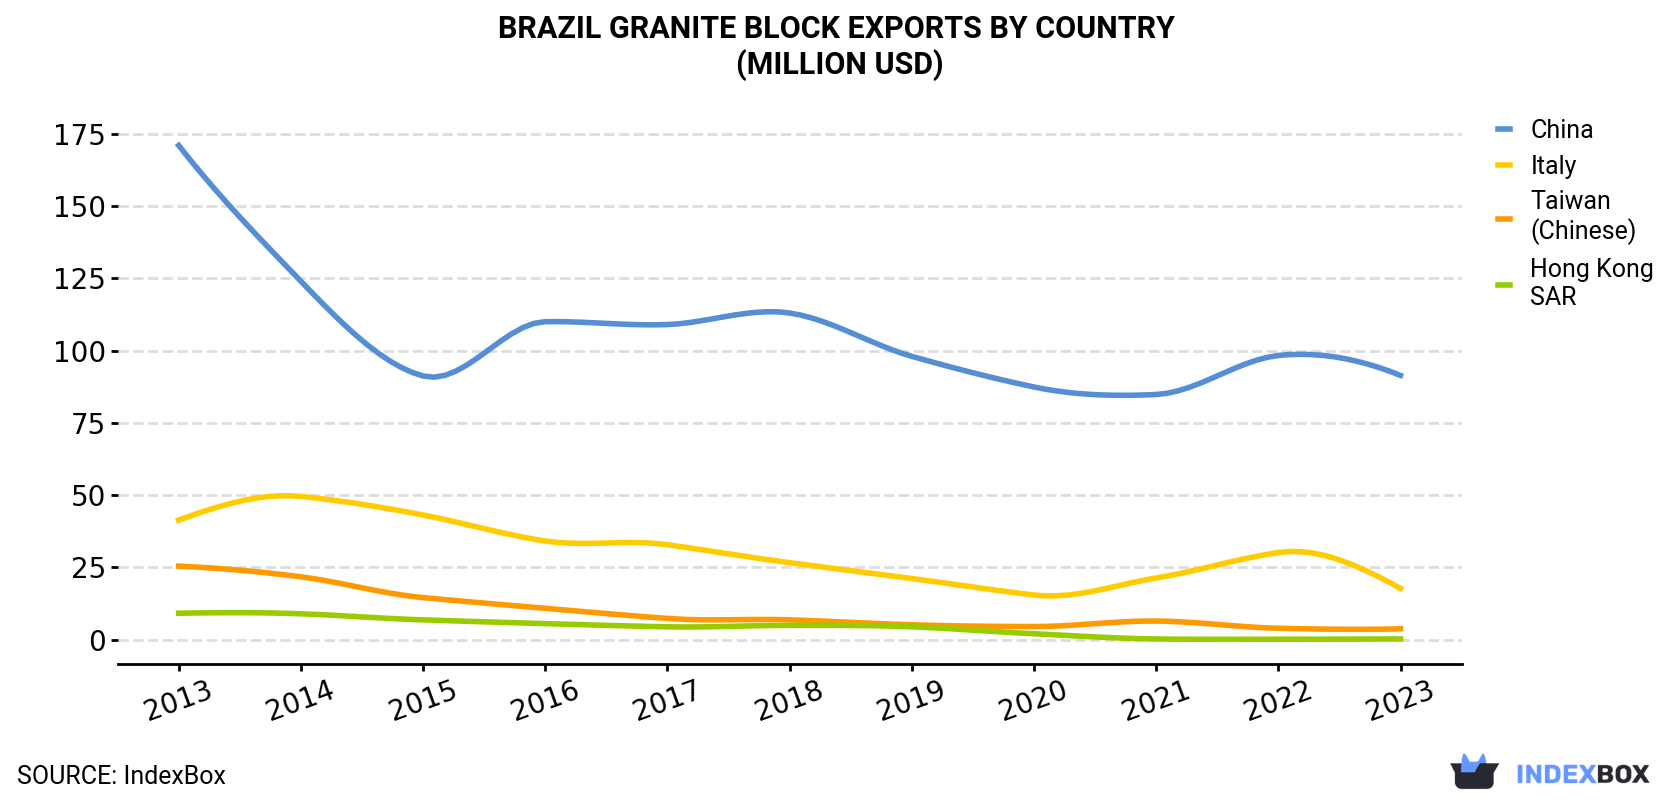 Brazil Granite Block Exports By Country (Million USD)